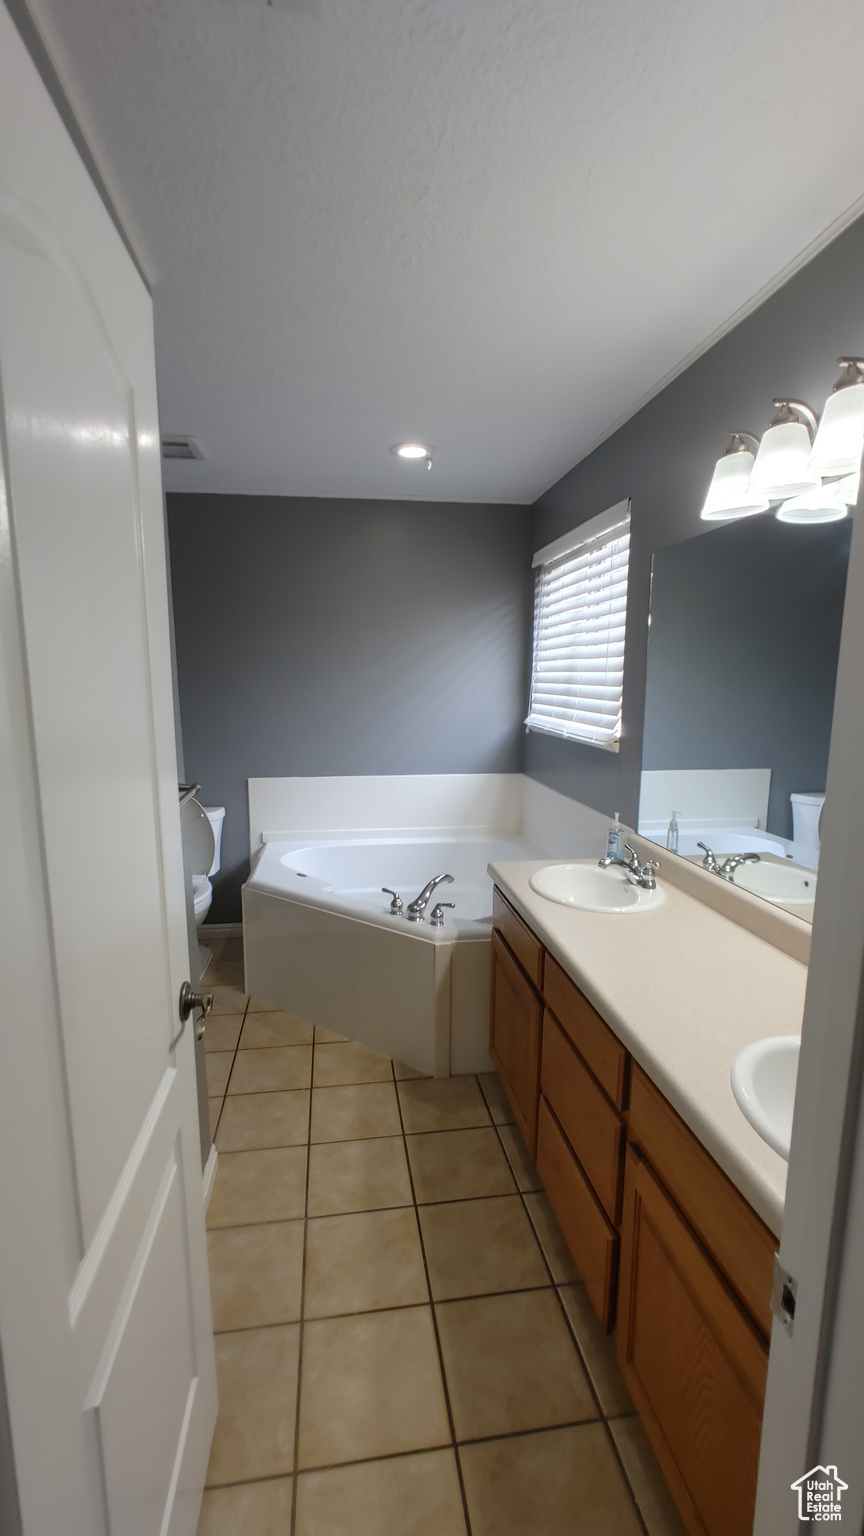 Bathroom featuring tile floors, vanity with extensive cabinet space, and a tub